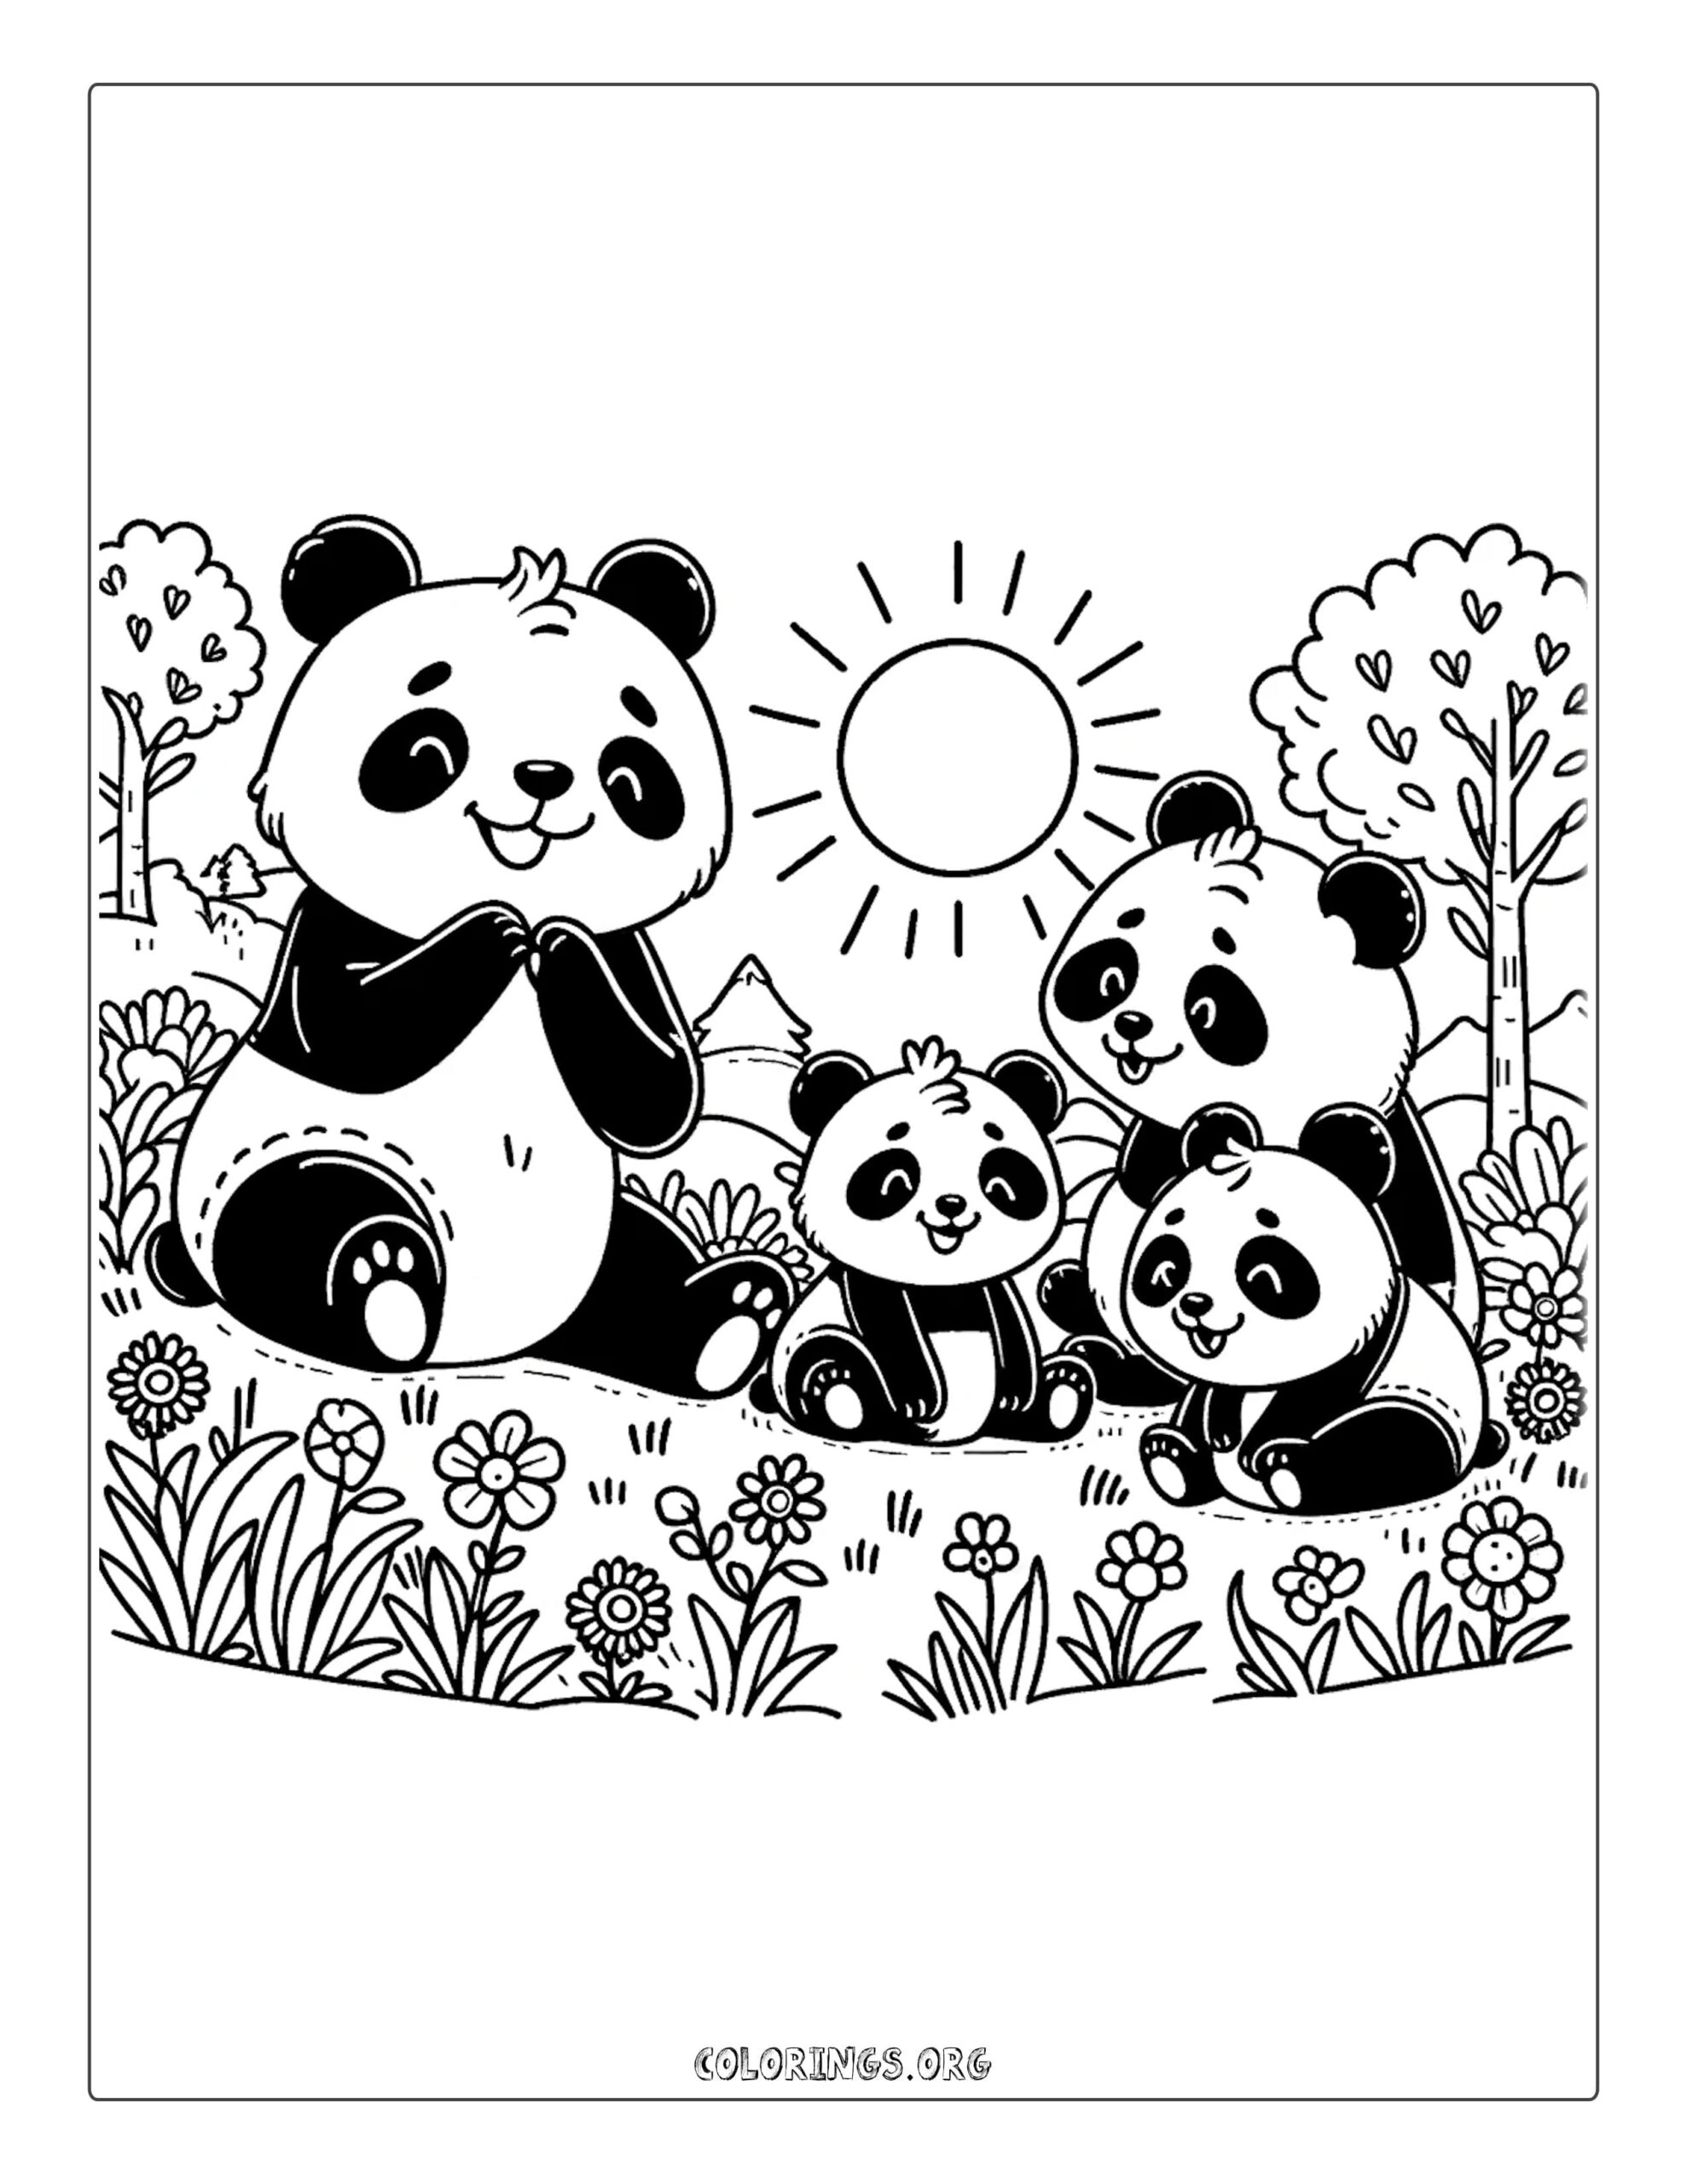 Panda Family in Meadow Coloring Page